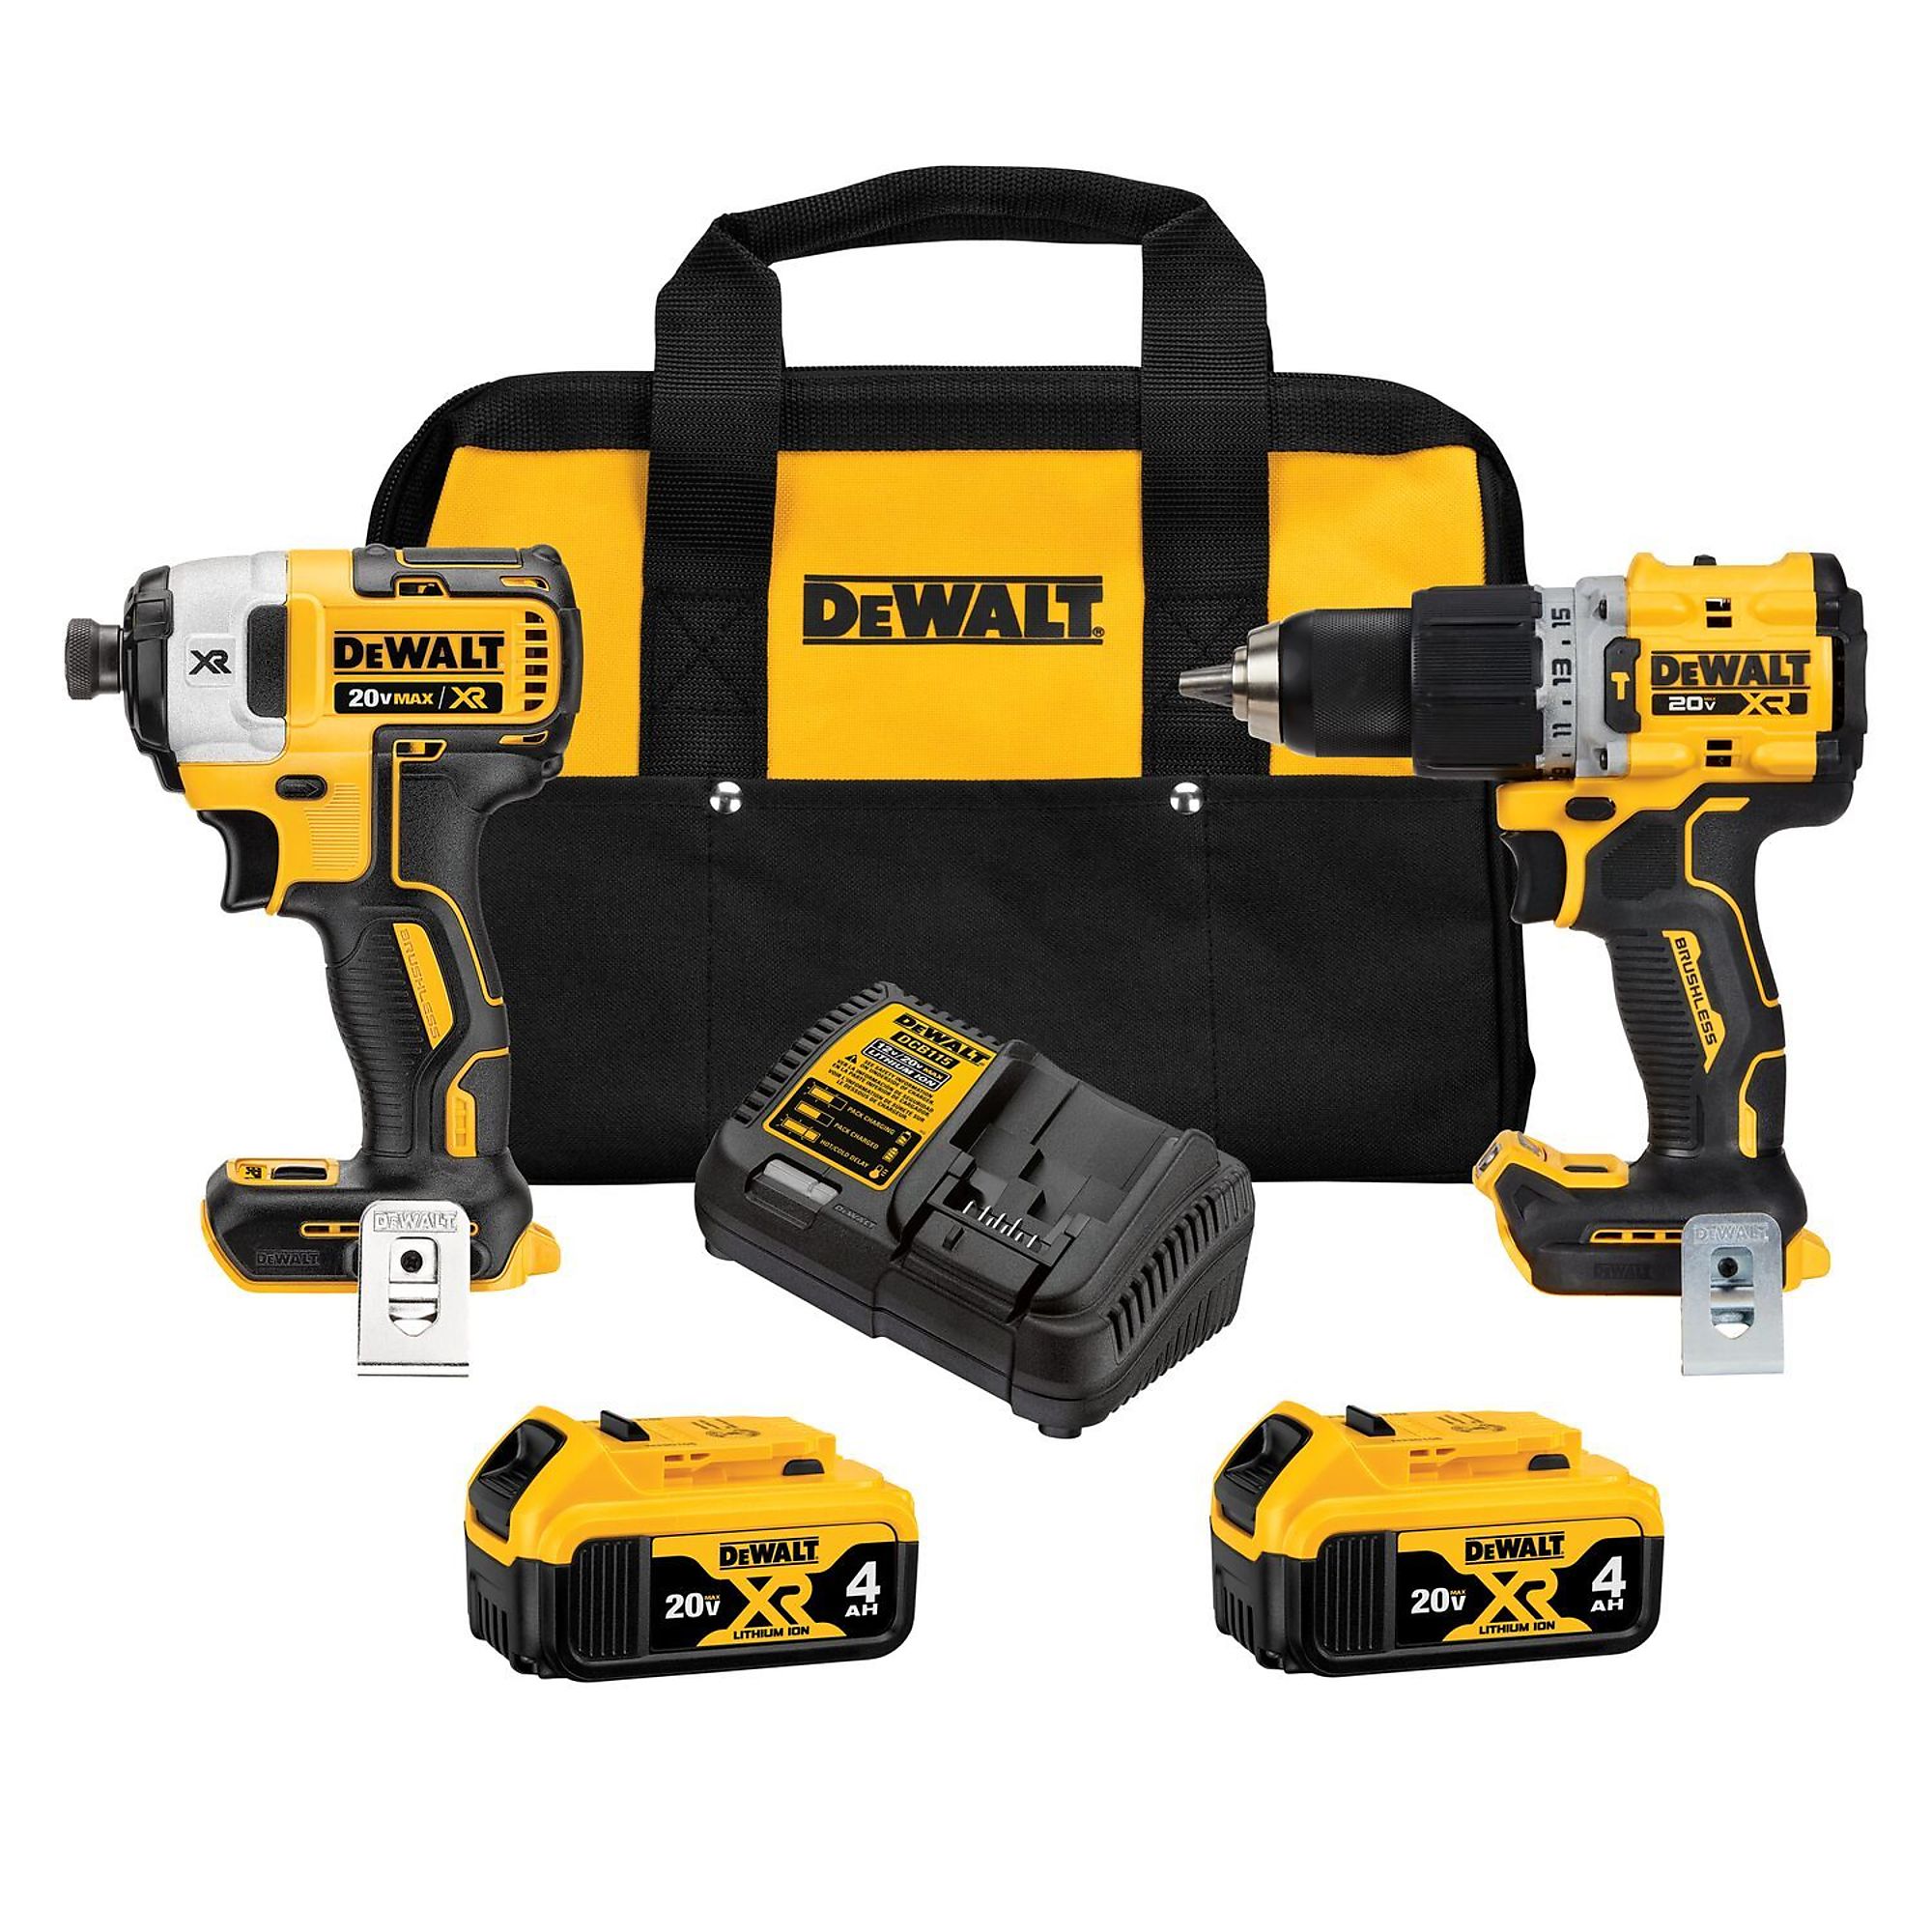 DEWALT, 20V MAX* XR Brushless 2 Tool Combo Kit, Chuck Size 1/2 in, Drive Size 1/4 in, Tools Included (qty.) 2, Model DCK249M2